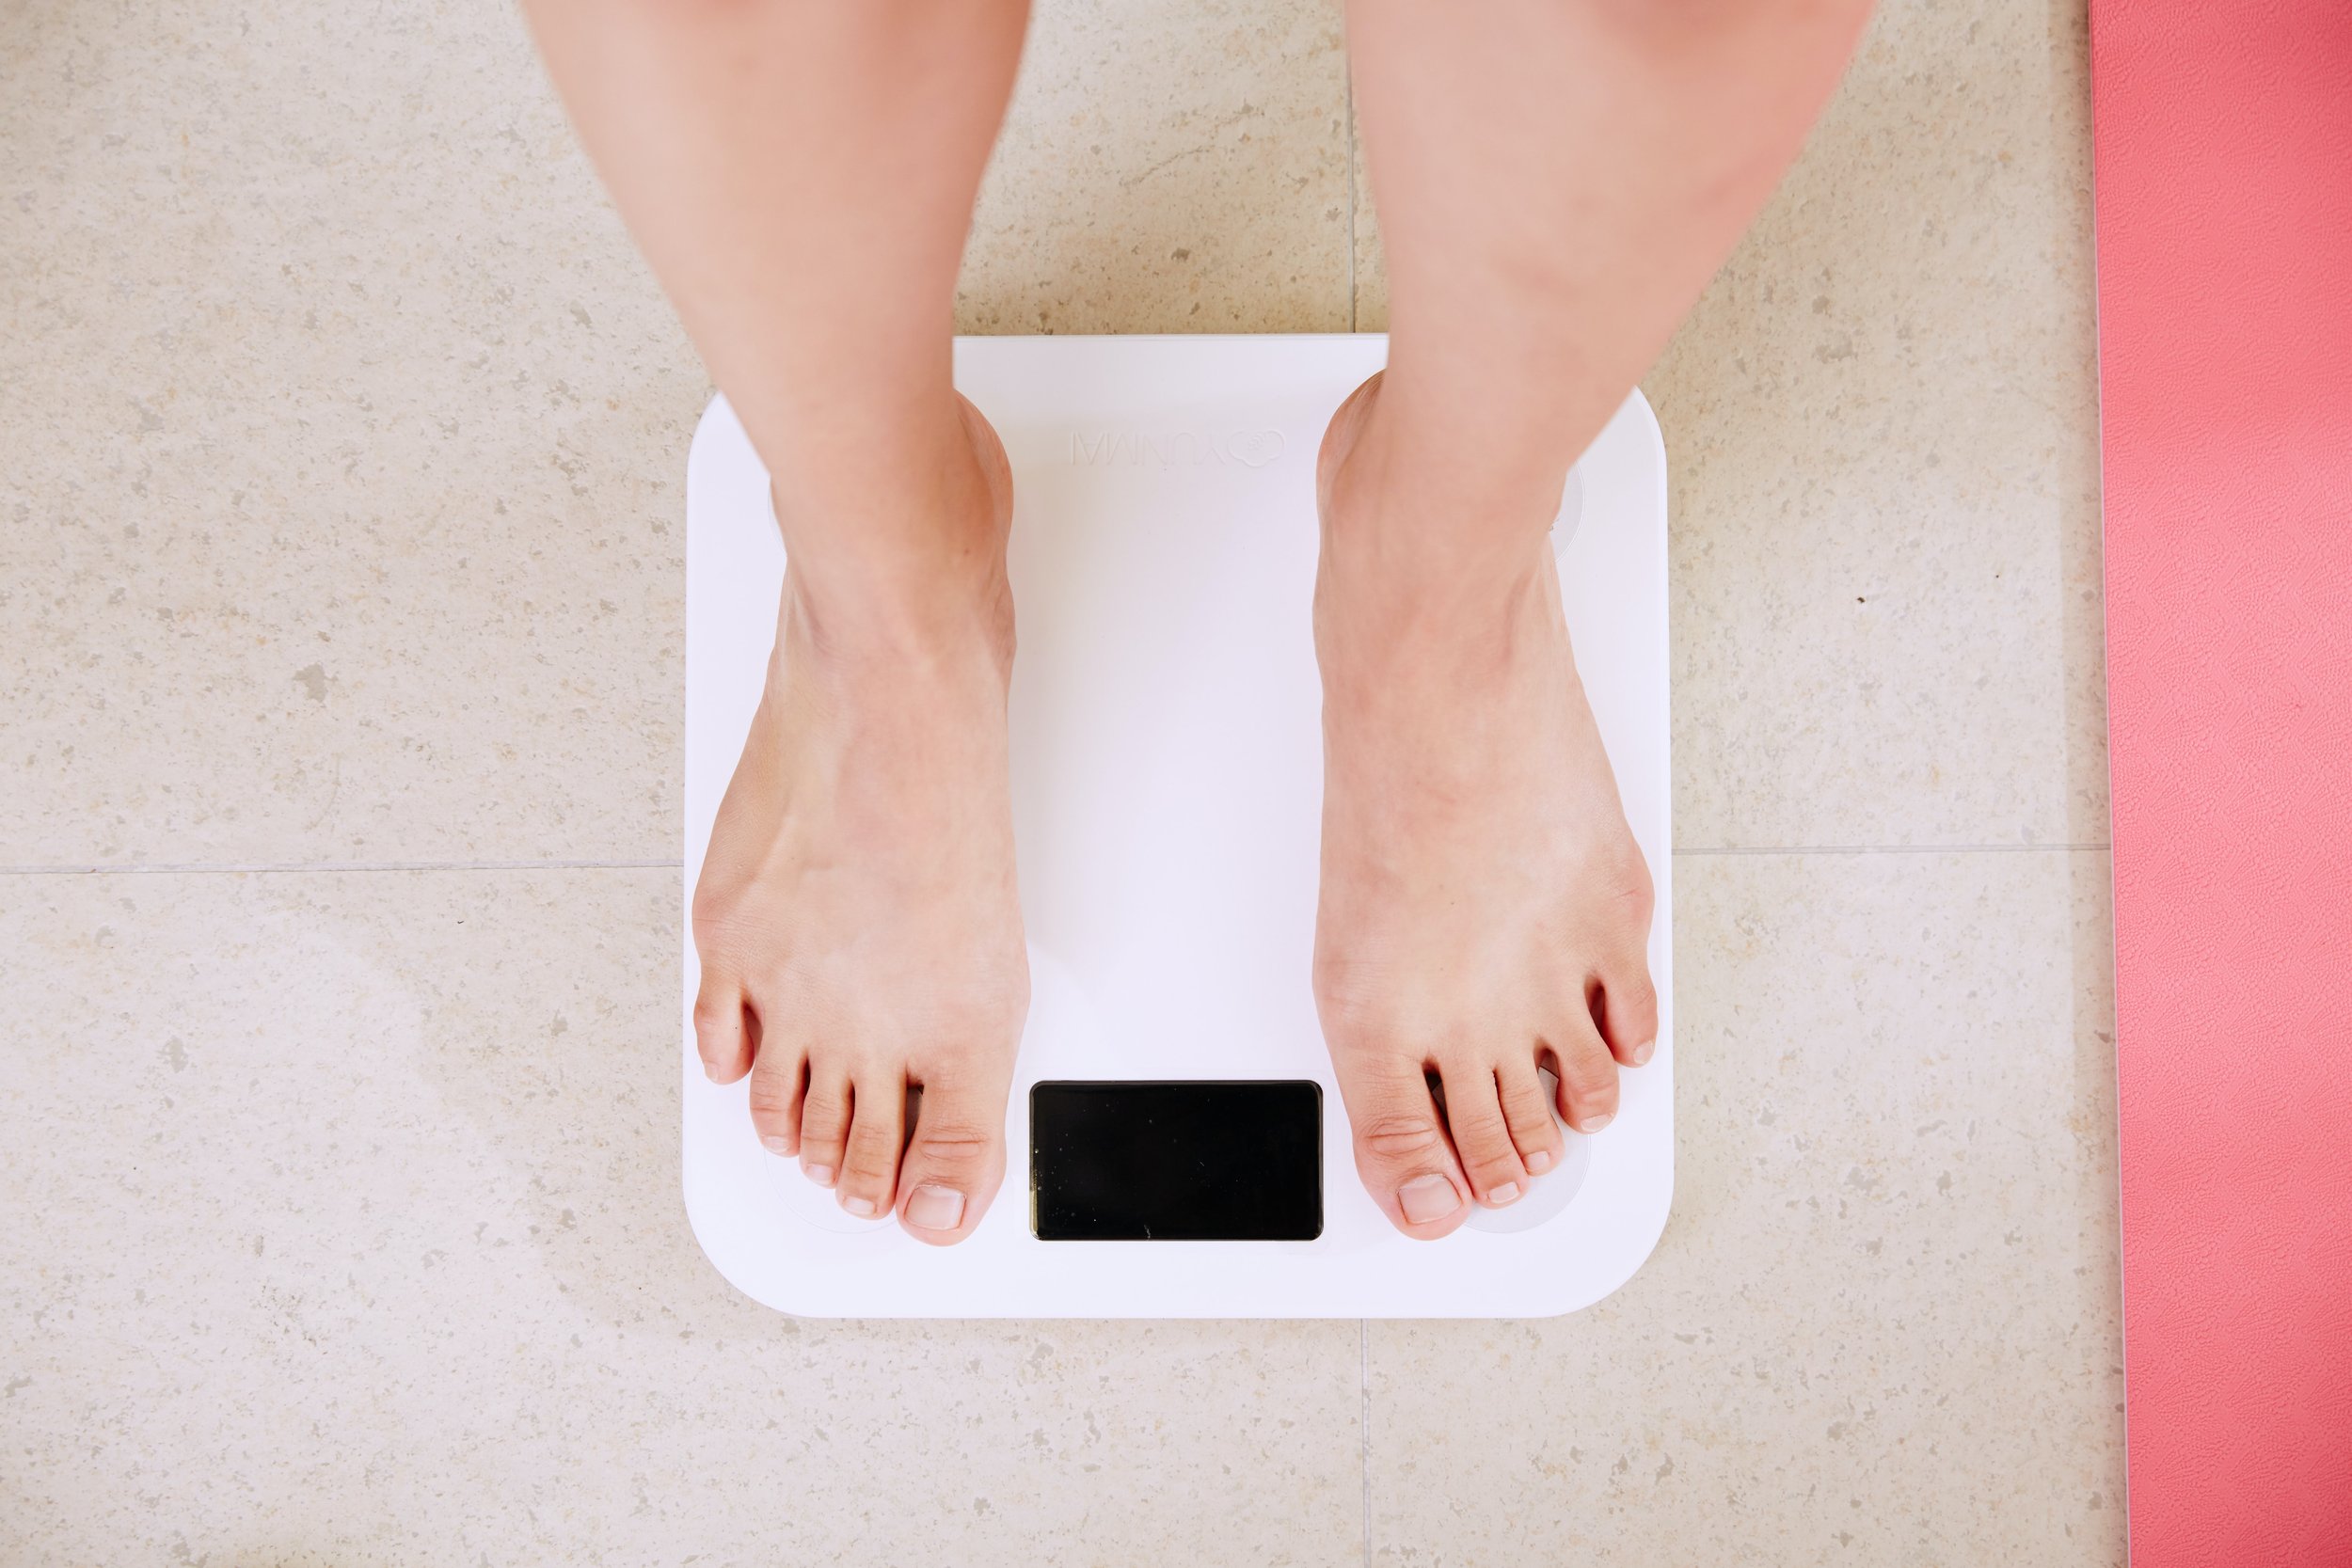 how to lose weight with pcos